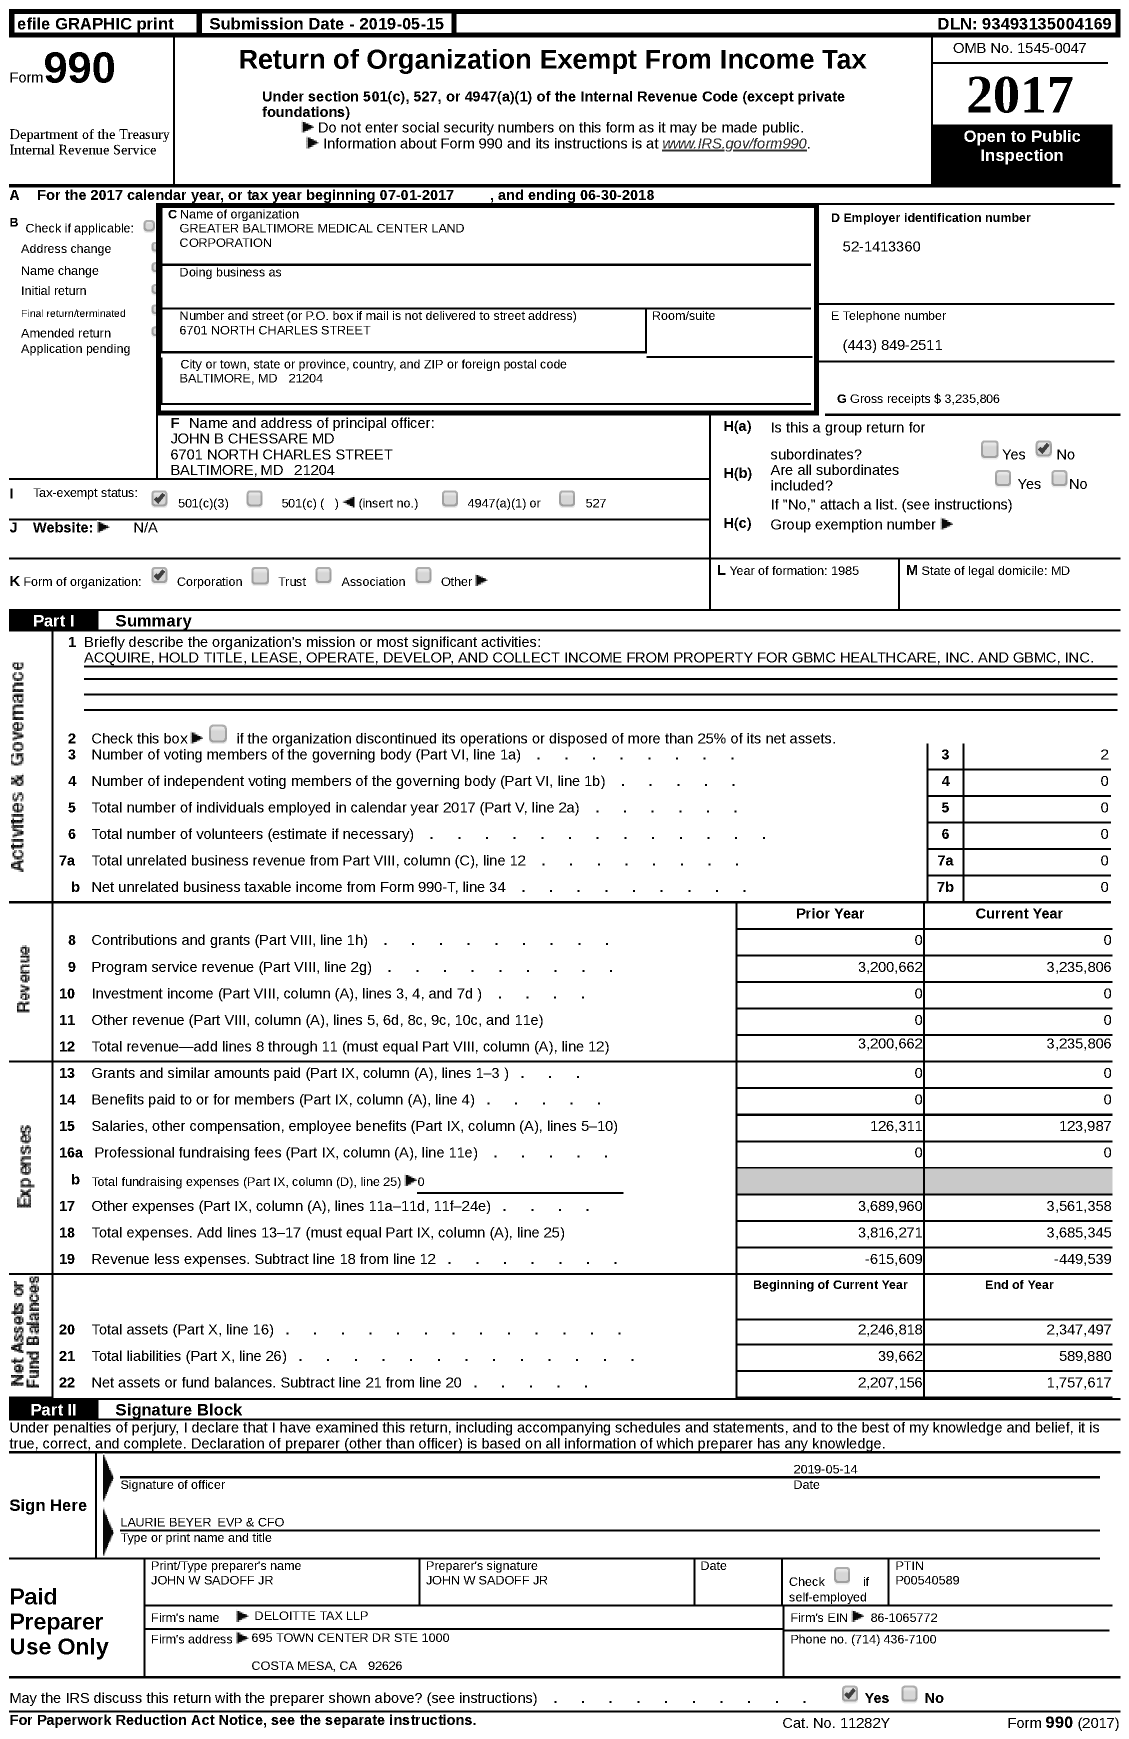 Image of first page of 2017 Form 990 for Greater Baltimore Medical Center Land Corporation